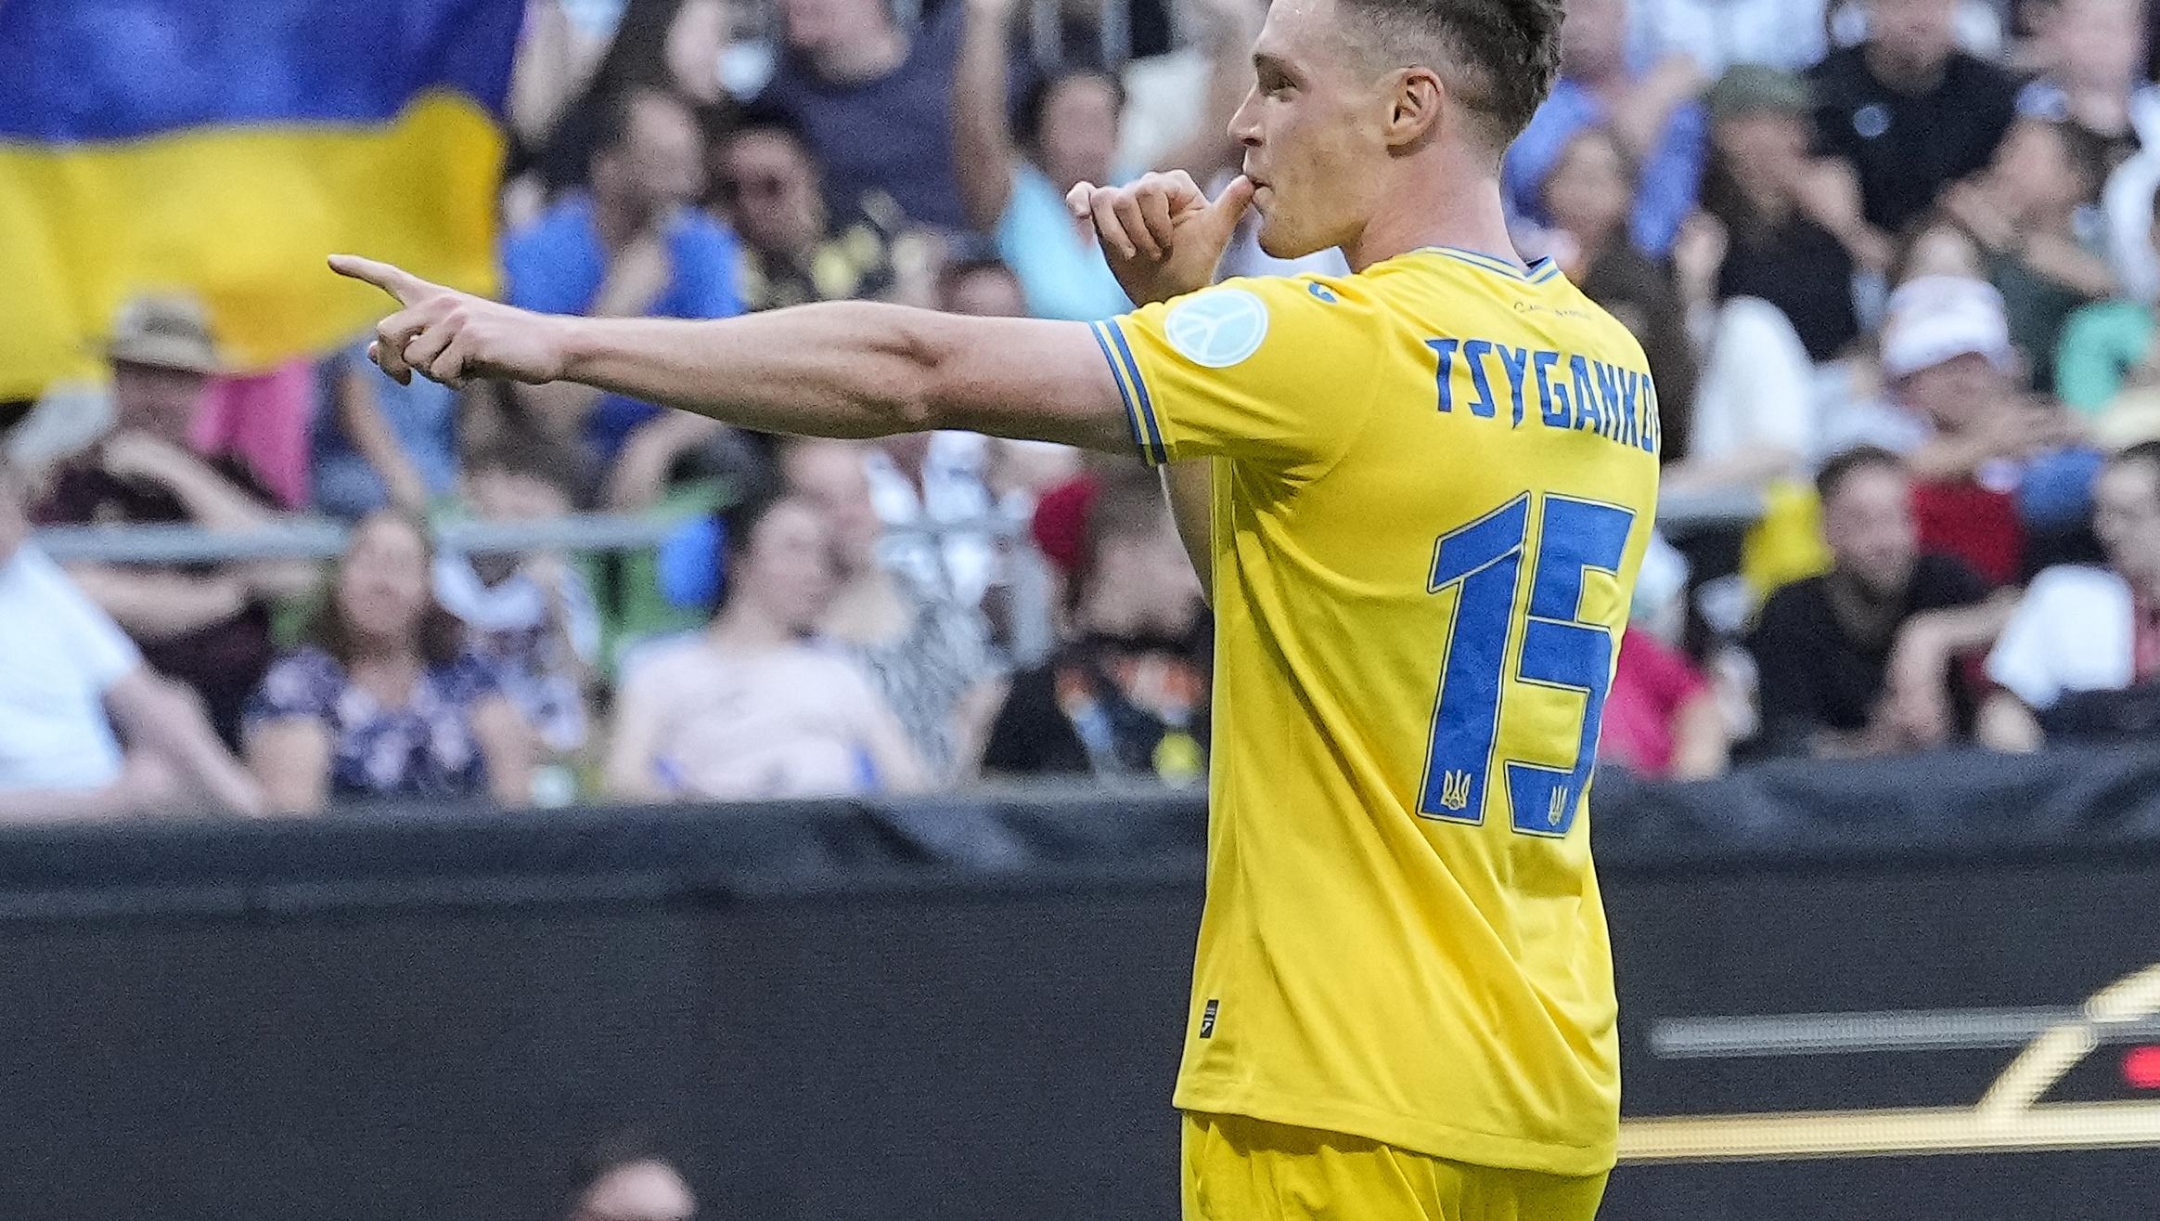 Ukraine's Viktor Tsygankov celebrates after scoring during a friendly soccer match between Germany and Ukraine in Bremen, Germany, Monday, June 12, 2023. It is the 1000st match for the German national soccer team. (AP Photo/Martin Meissner)